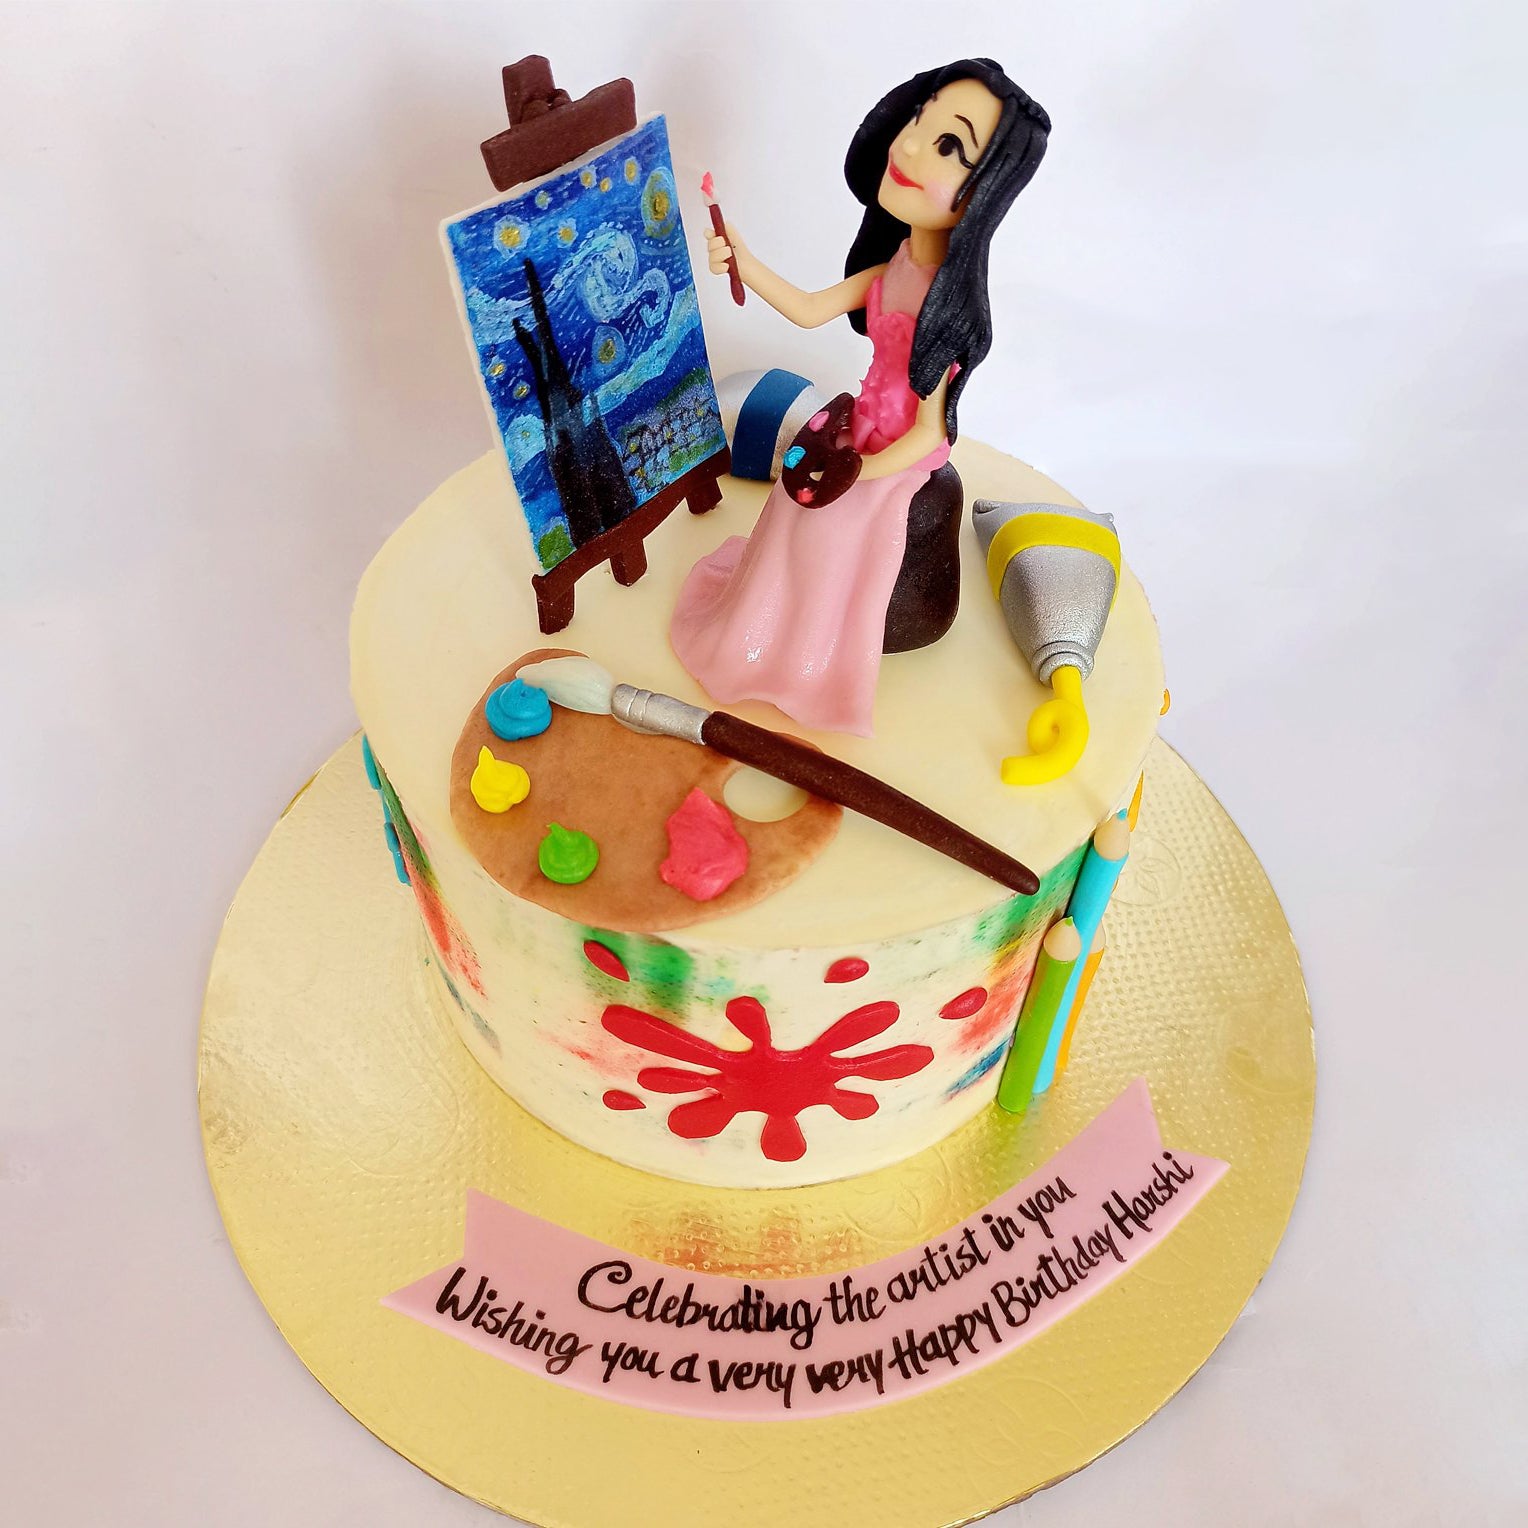 Vote/Join: Artist of the World's Eye-Catching Cakes